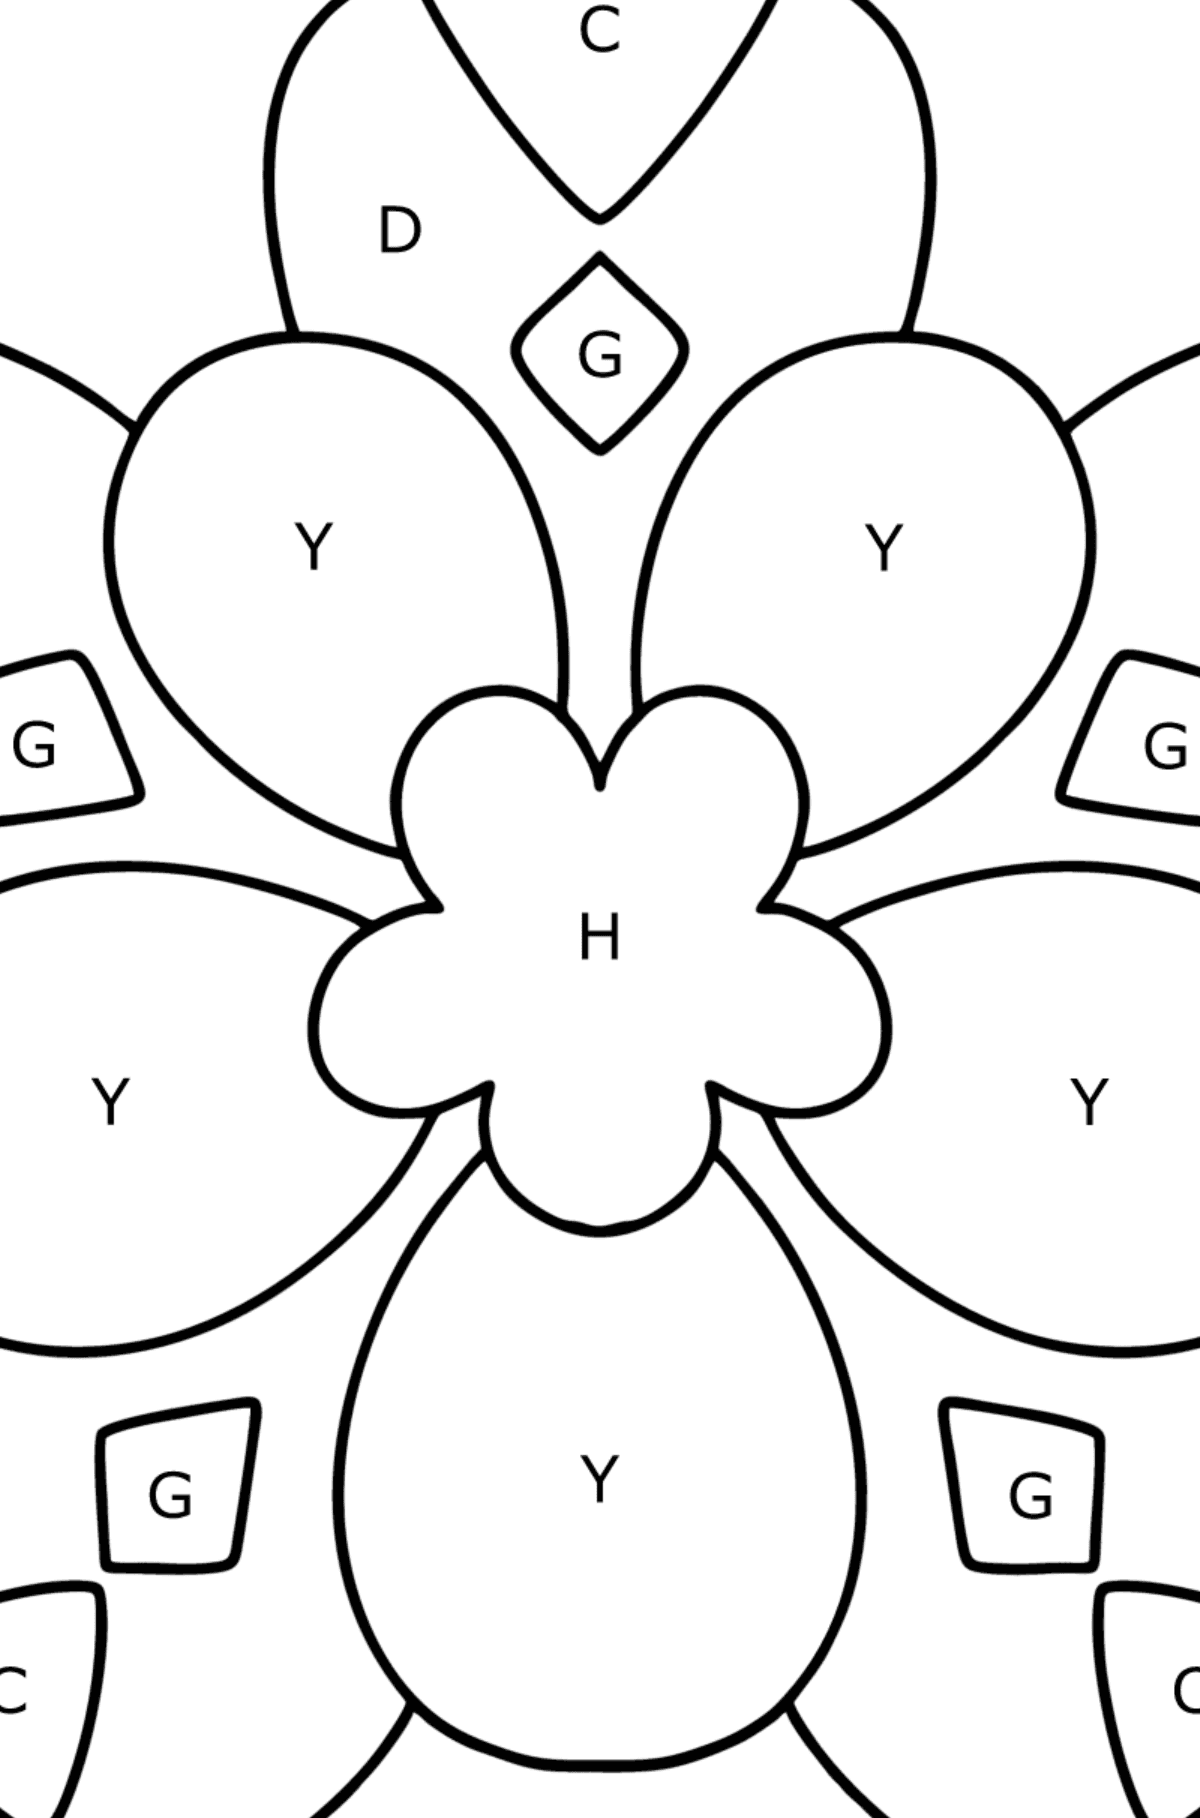 Anti stress Heart coloring page - Coloring by Letters for Kids